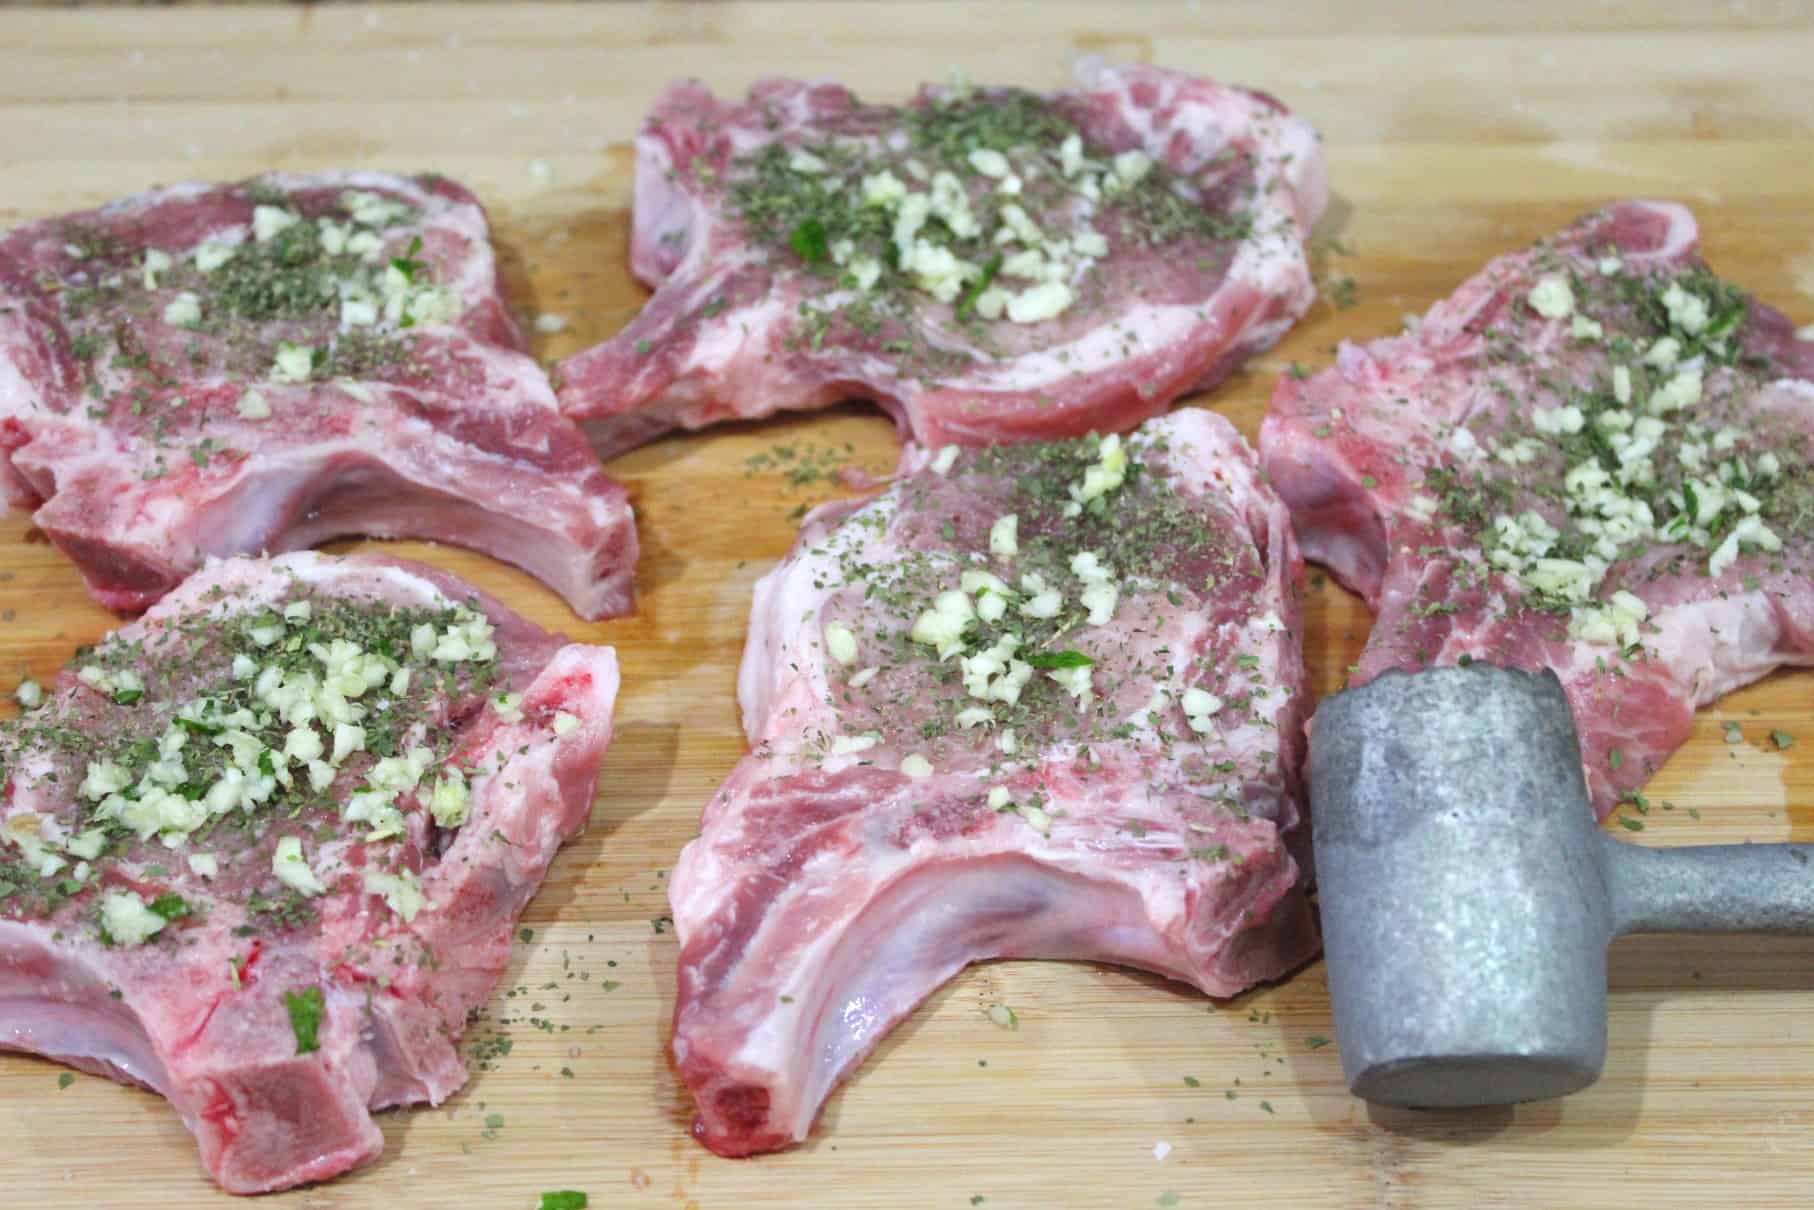 A wooden block with pork chops seasoned with herbs and garlic. Chops are shown next to a meat tenderizer hammer. 